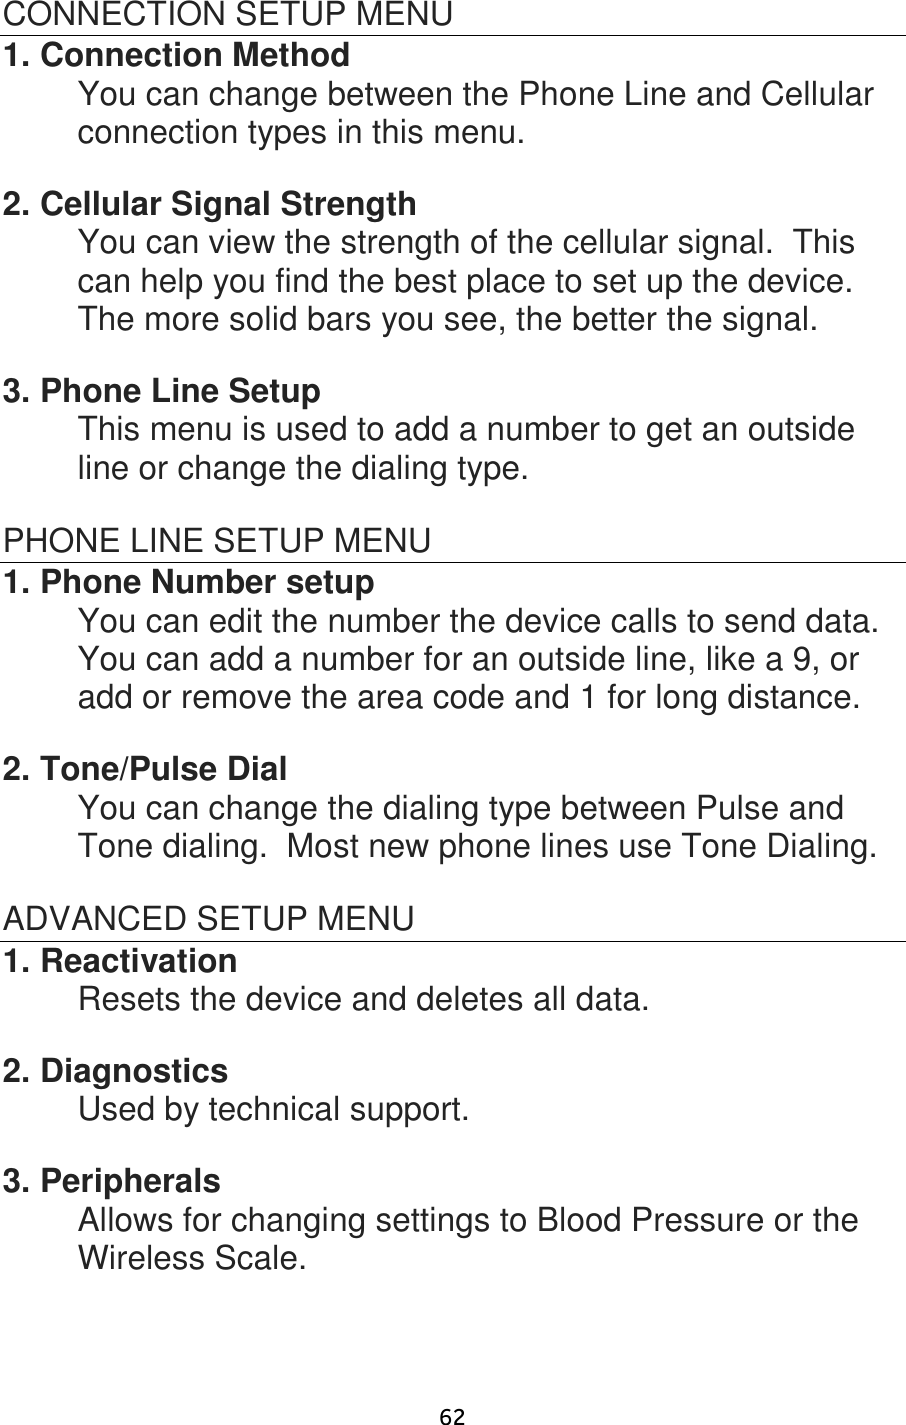                      62 CONNECTION SETUP MENU 1. Connection Method   You can change between the Phone Line and Cellular connection types in this menu.  2. Cellular Signal Strength     You can view the strength of the cellular signal.  This can help you find the best place to set up the device.  The more solid bars you see, the better the signal.  3. Phone Line Setup   This menu is used to add a number to get an outside line or change the dialing type.  PHONE LINE SETUP MENU 1. Phone Number setup You can edit the number the device calls to send data.  You can add a number for an outside line, like a 9, or add or remove the area code and 1 for long distance.  2. Tone/Pulse Dial You can change the dialing type between Pulse and Tone dialing.  Most new phone lines use Tone Dialing.  ADVANCED SETUP MENU 1. Reactivation Resets the device and deletes all data.  2. Diagnostics   Used by technical support.  3. Peripherals Allows for changing settings to Blood Pressure or the Wireless Scale. 